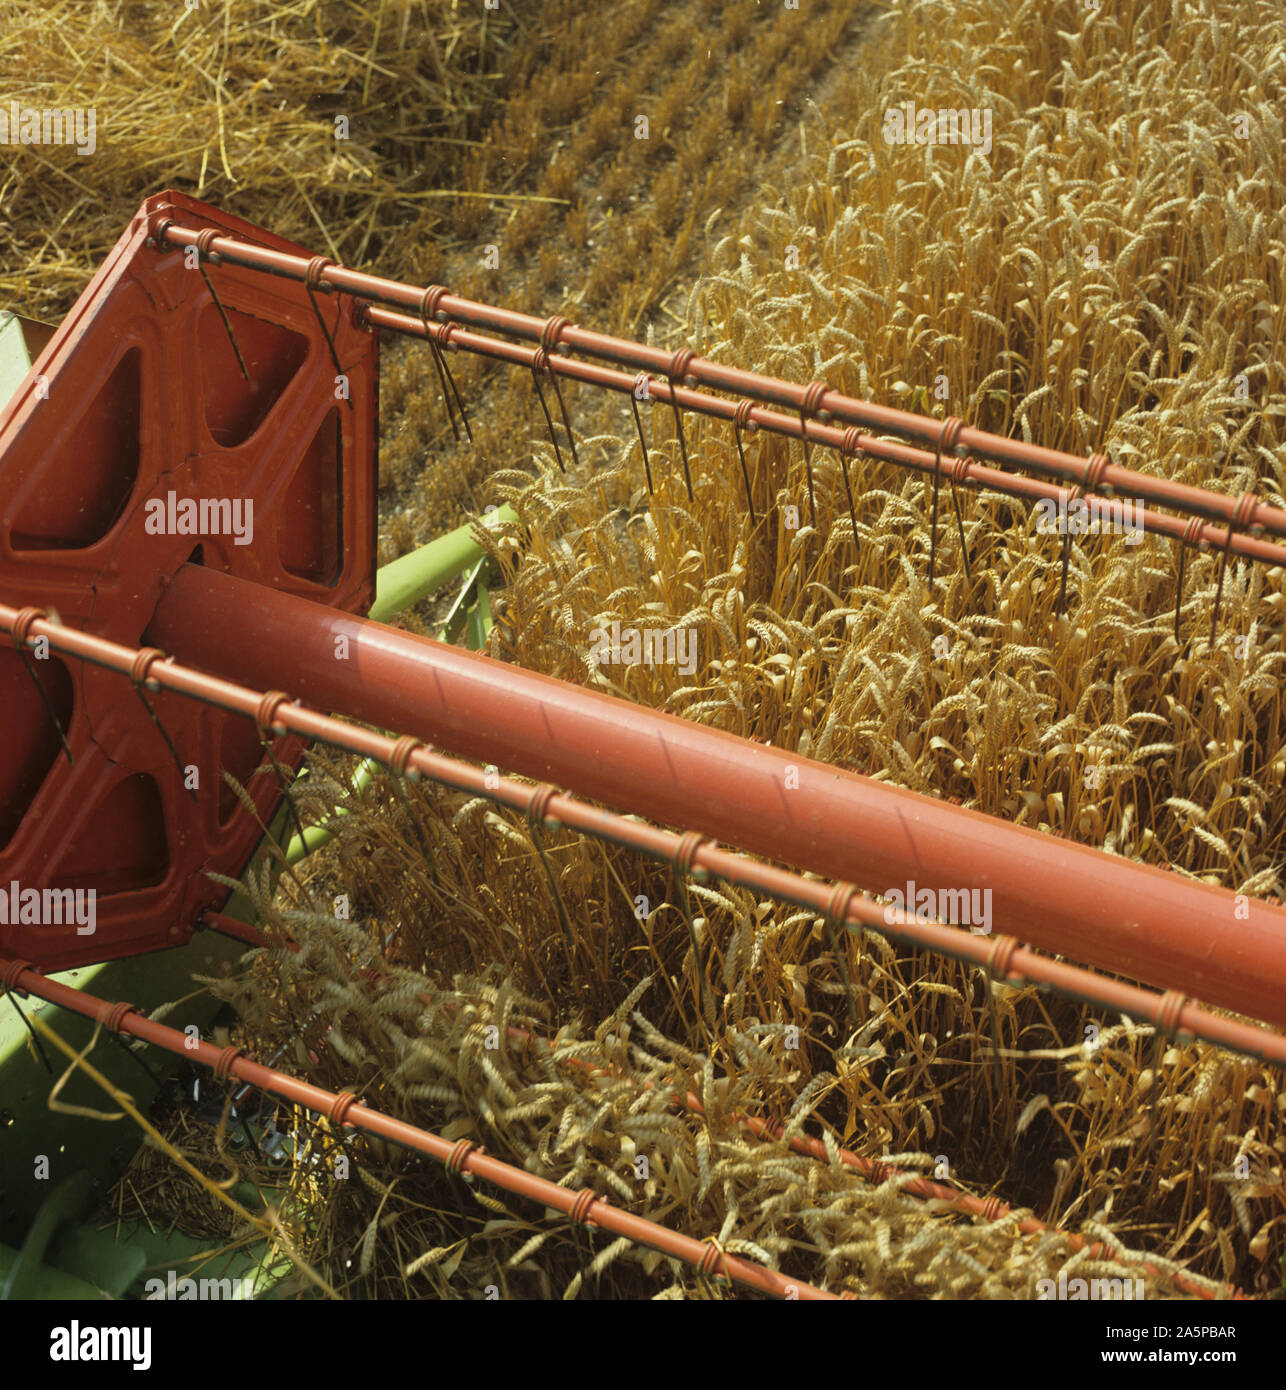 Looking down from the cab of a Claas combine at the header harvesting good  ripe wheat crop, Oxfordshire Stock Photo